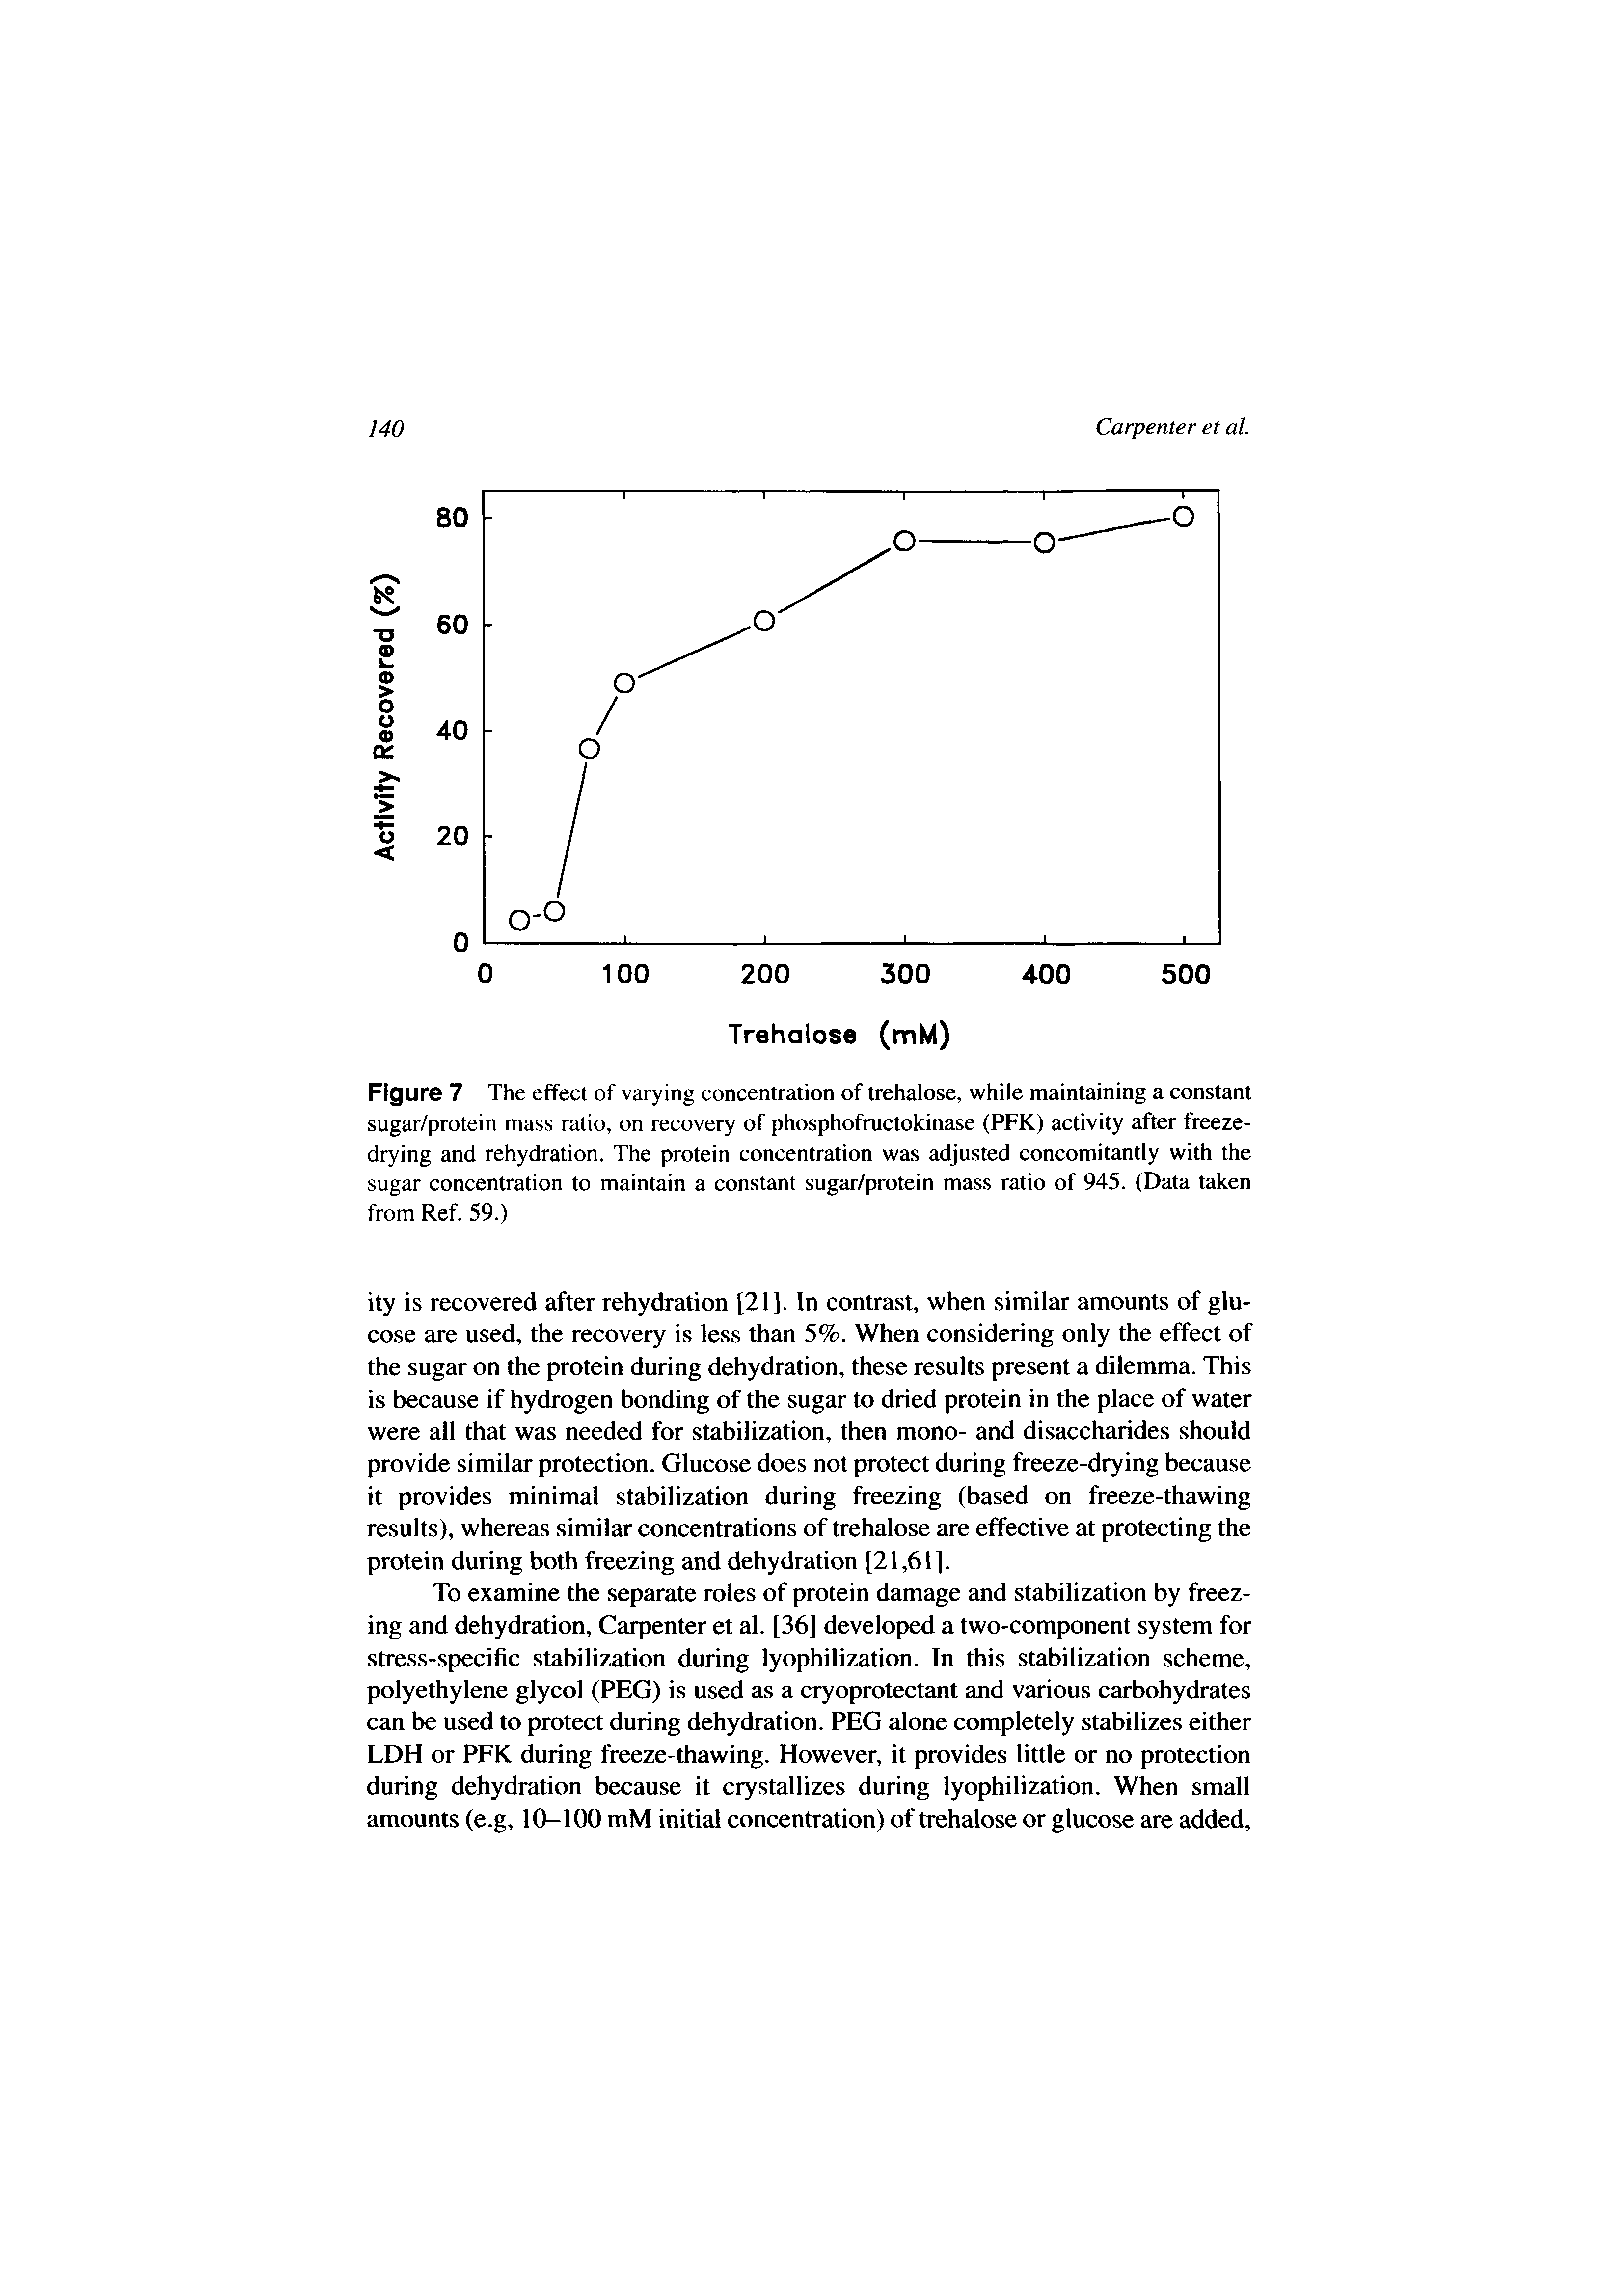 Figure 7 The effect of varying concentration of trehalose, while maintaining a constant sugar/protein mass ratio, on recovery of phosphofructokinase (PFK) activity after freezedrying and rehydration. The protein concentration was adjusted concomitantly with the sugar concentration to maintain a constant sugar/protein mass ratio of 945. (Data taken from Ref. 59.)...